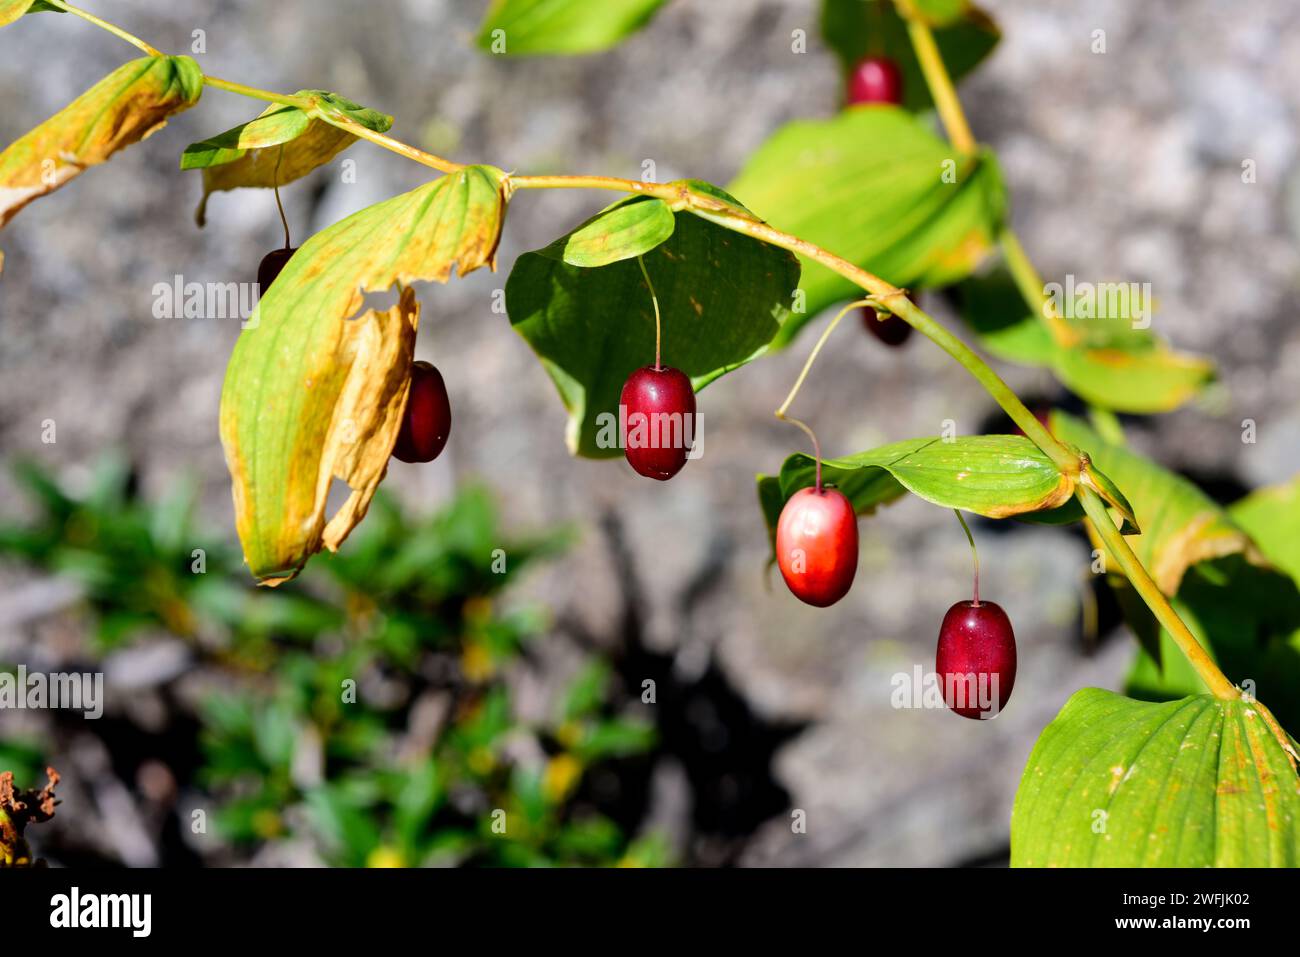 Twidstedstolck (Streptopus amplexifolius) is a perennial herb native to Eurasia and North America. Its fruits are edible. This photo was taken in Aigu Stock Photo